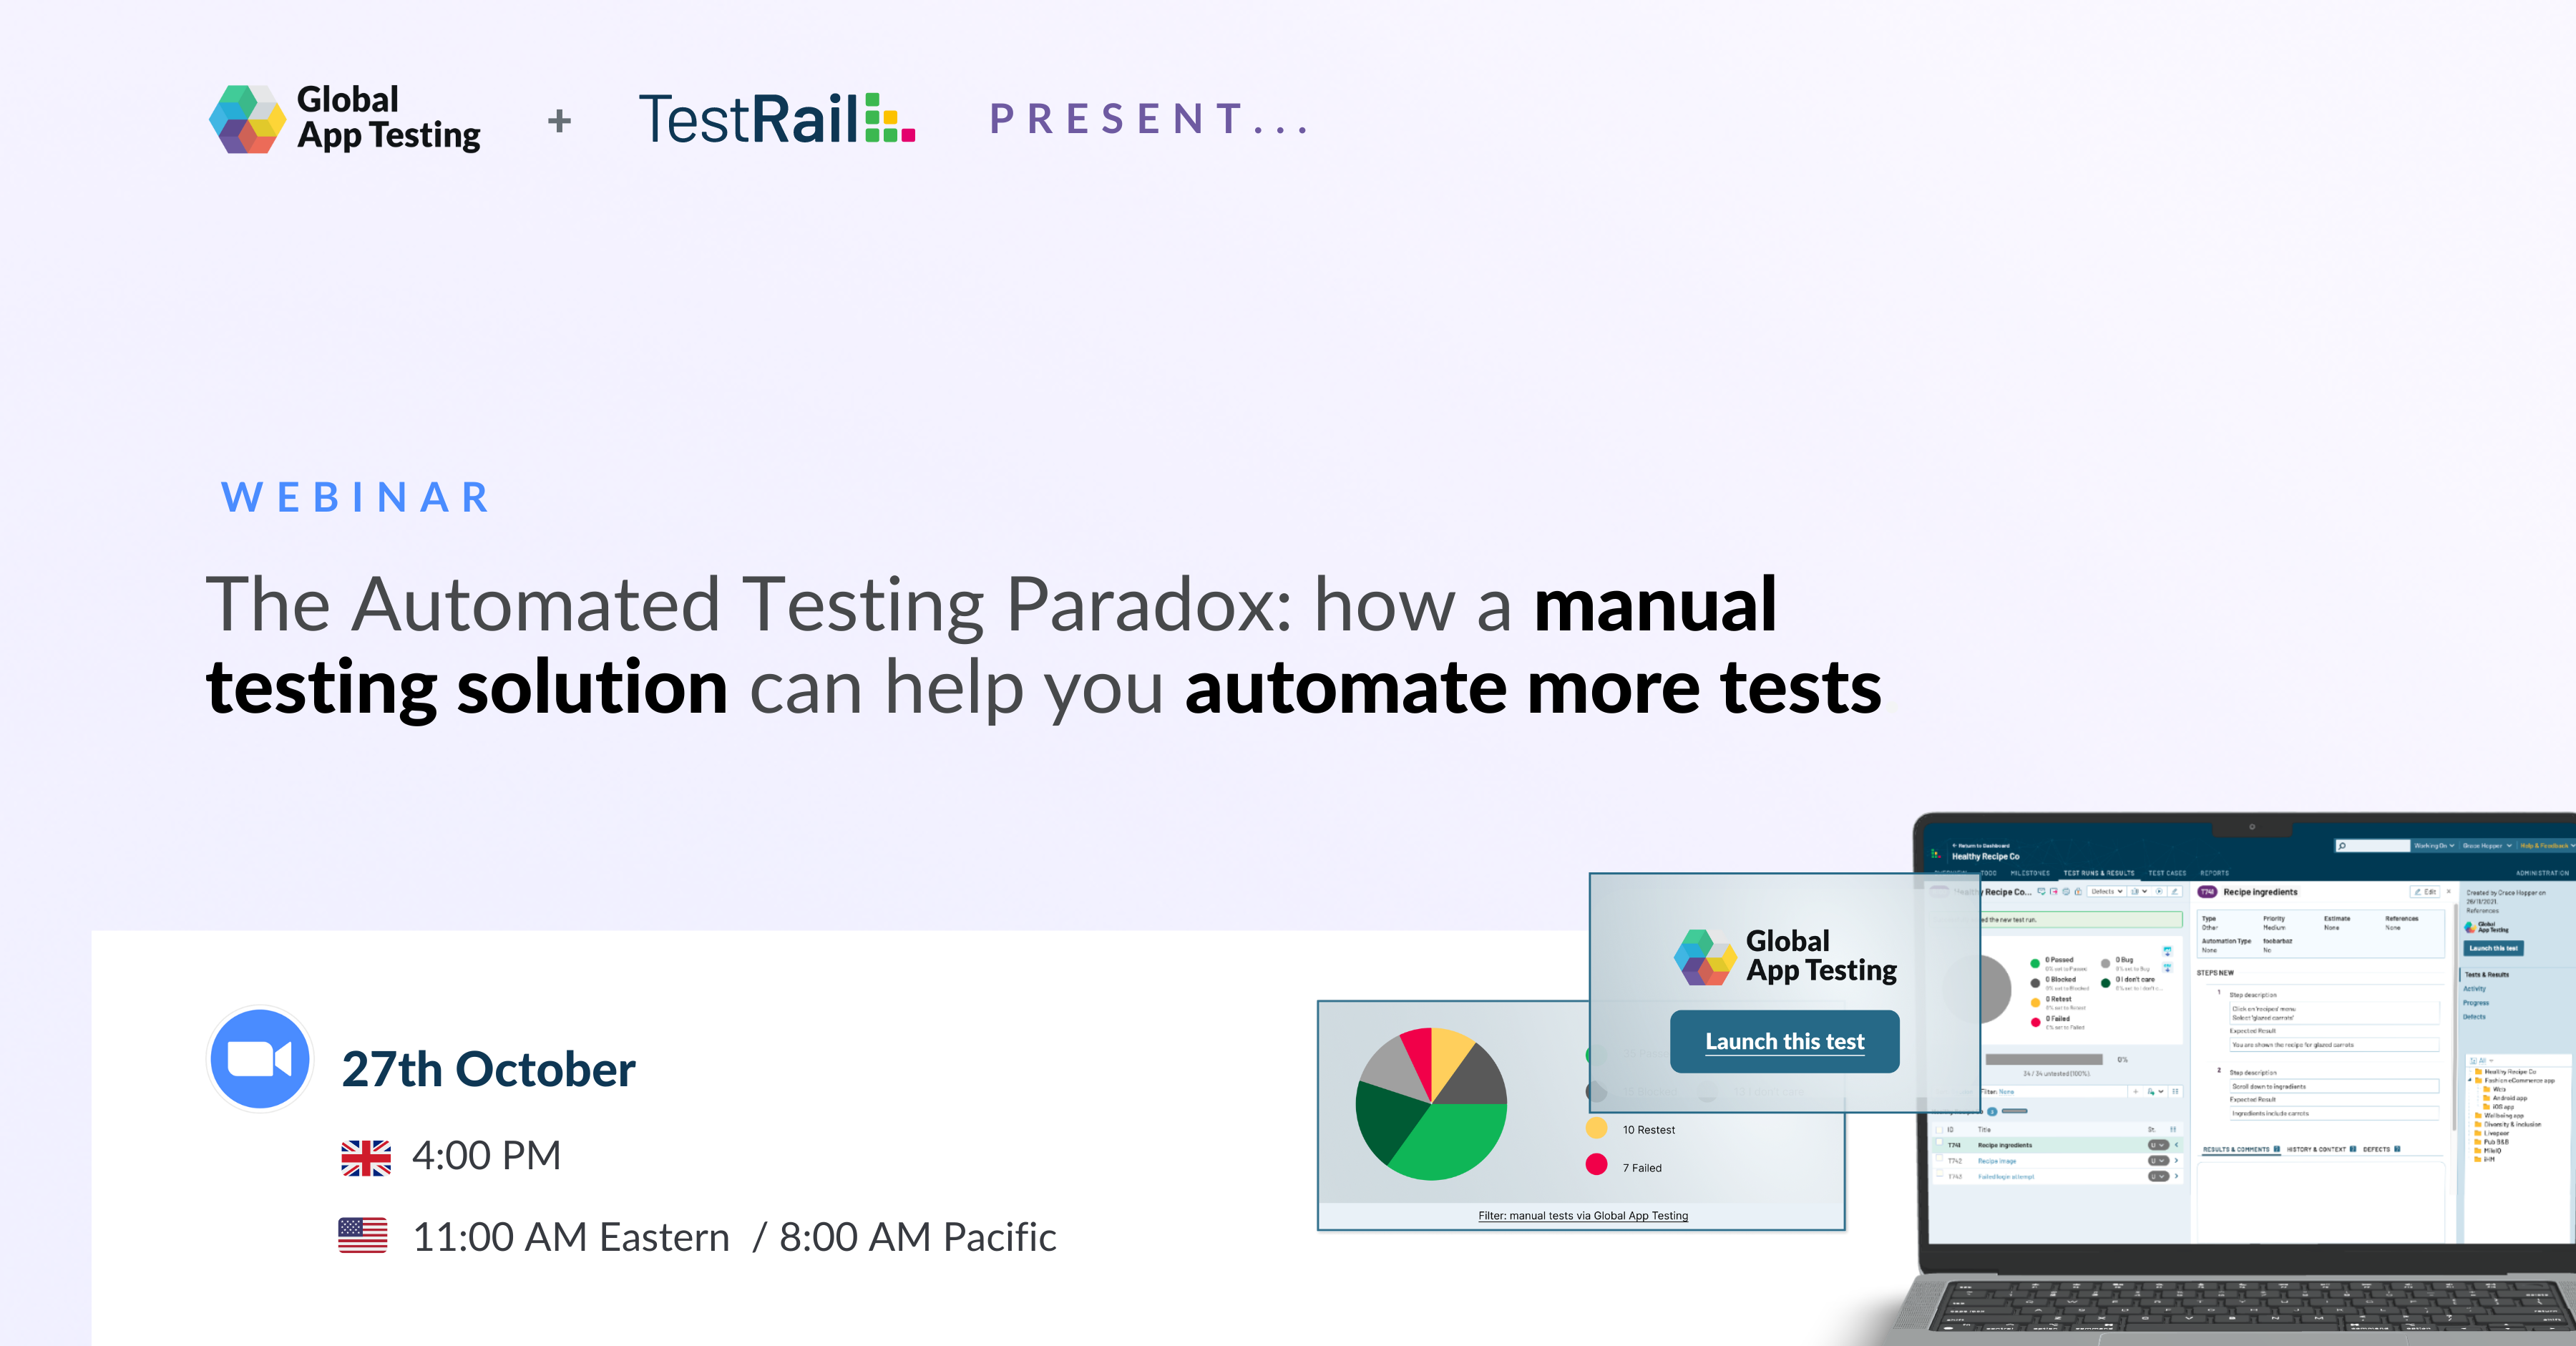 The Automated Testing Paradox – how can a manual testing solution help you automate more tests?